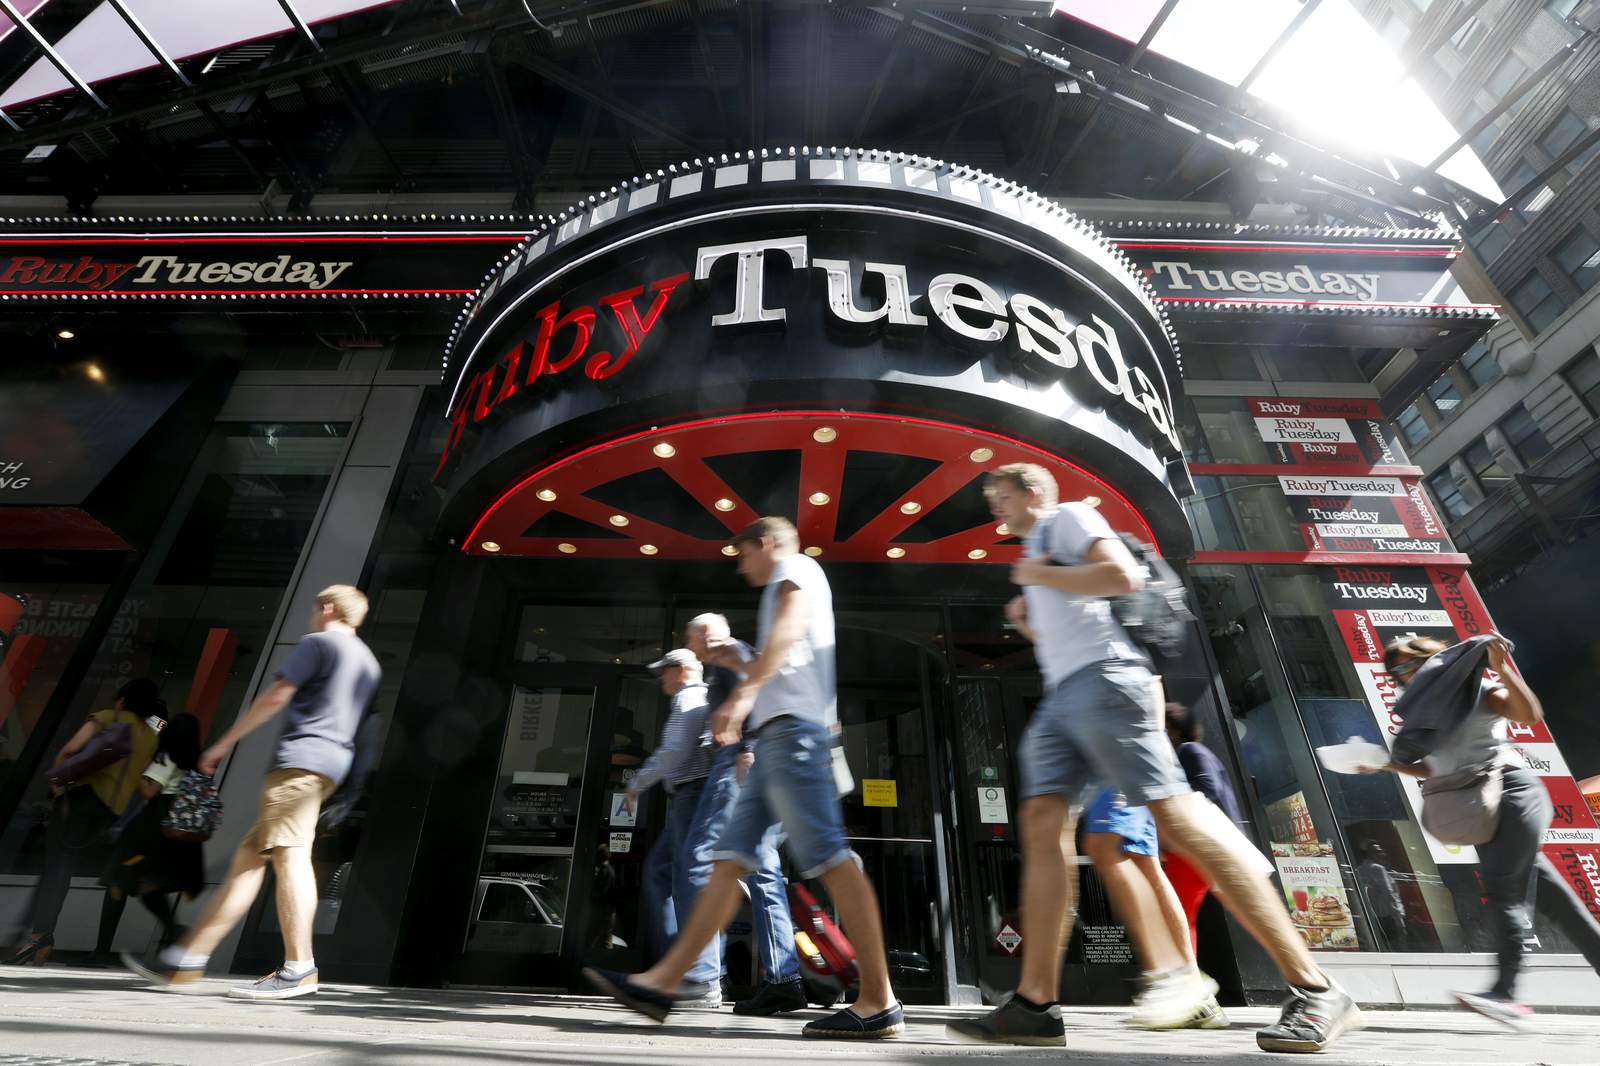 Ruby Tuesday, hit by COVID closures, files for bankruptcy